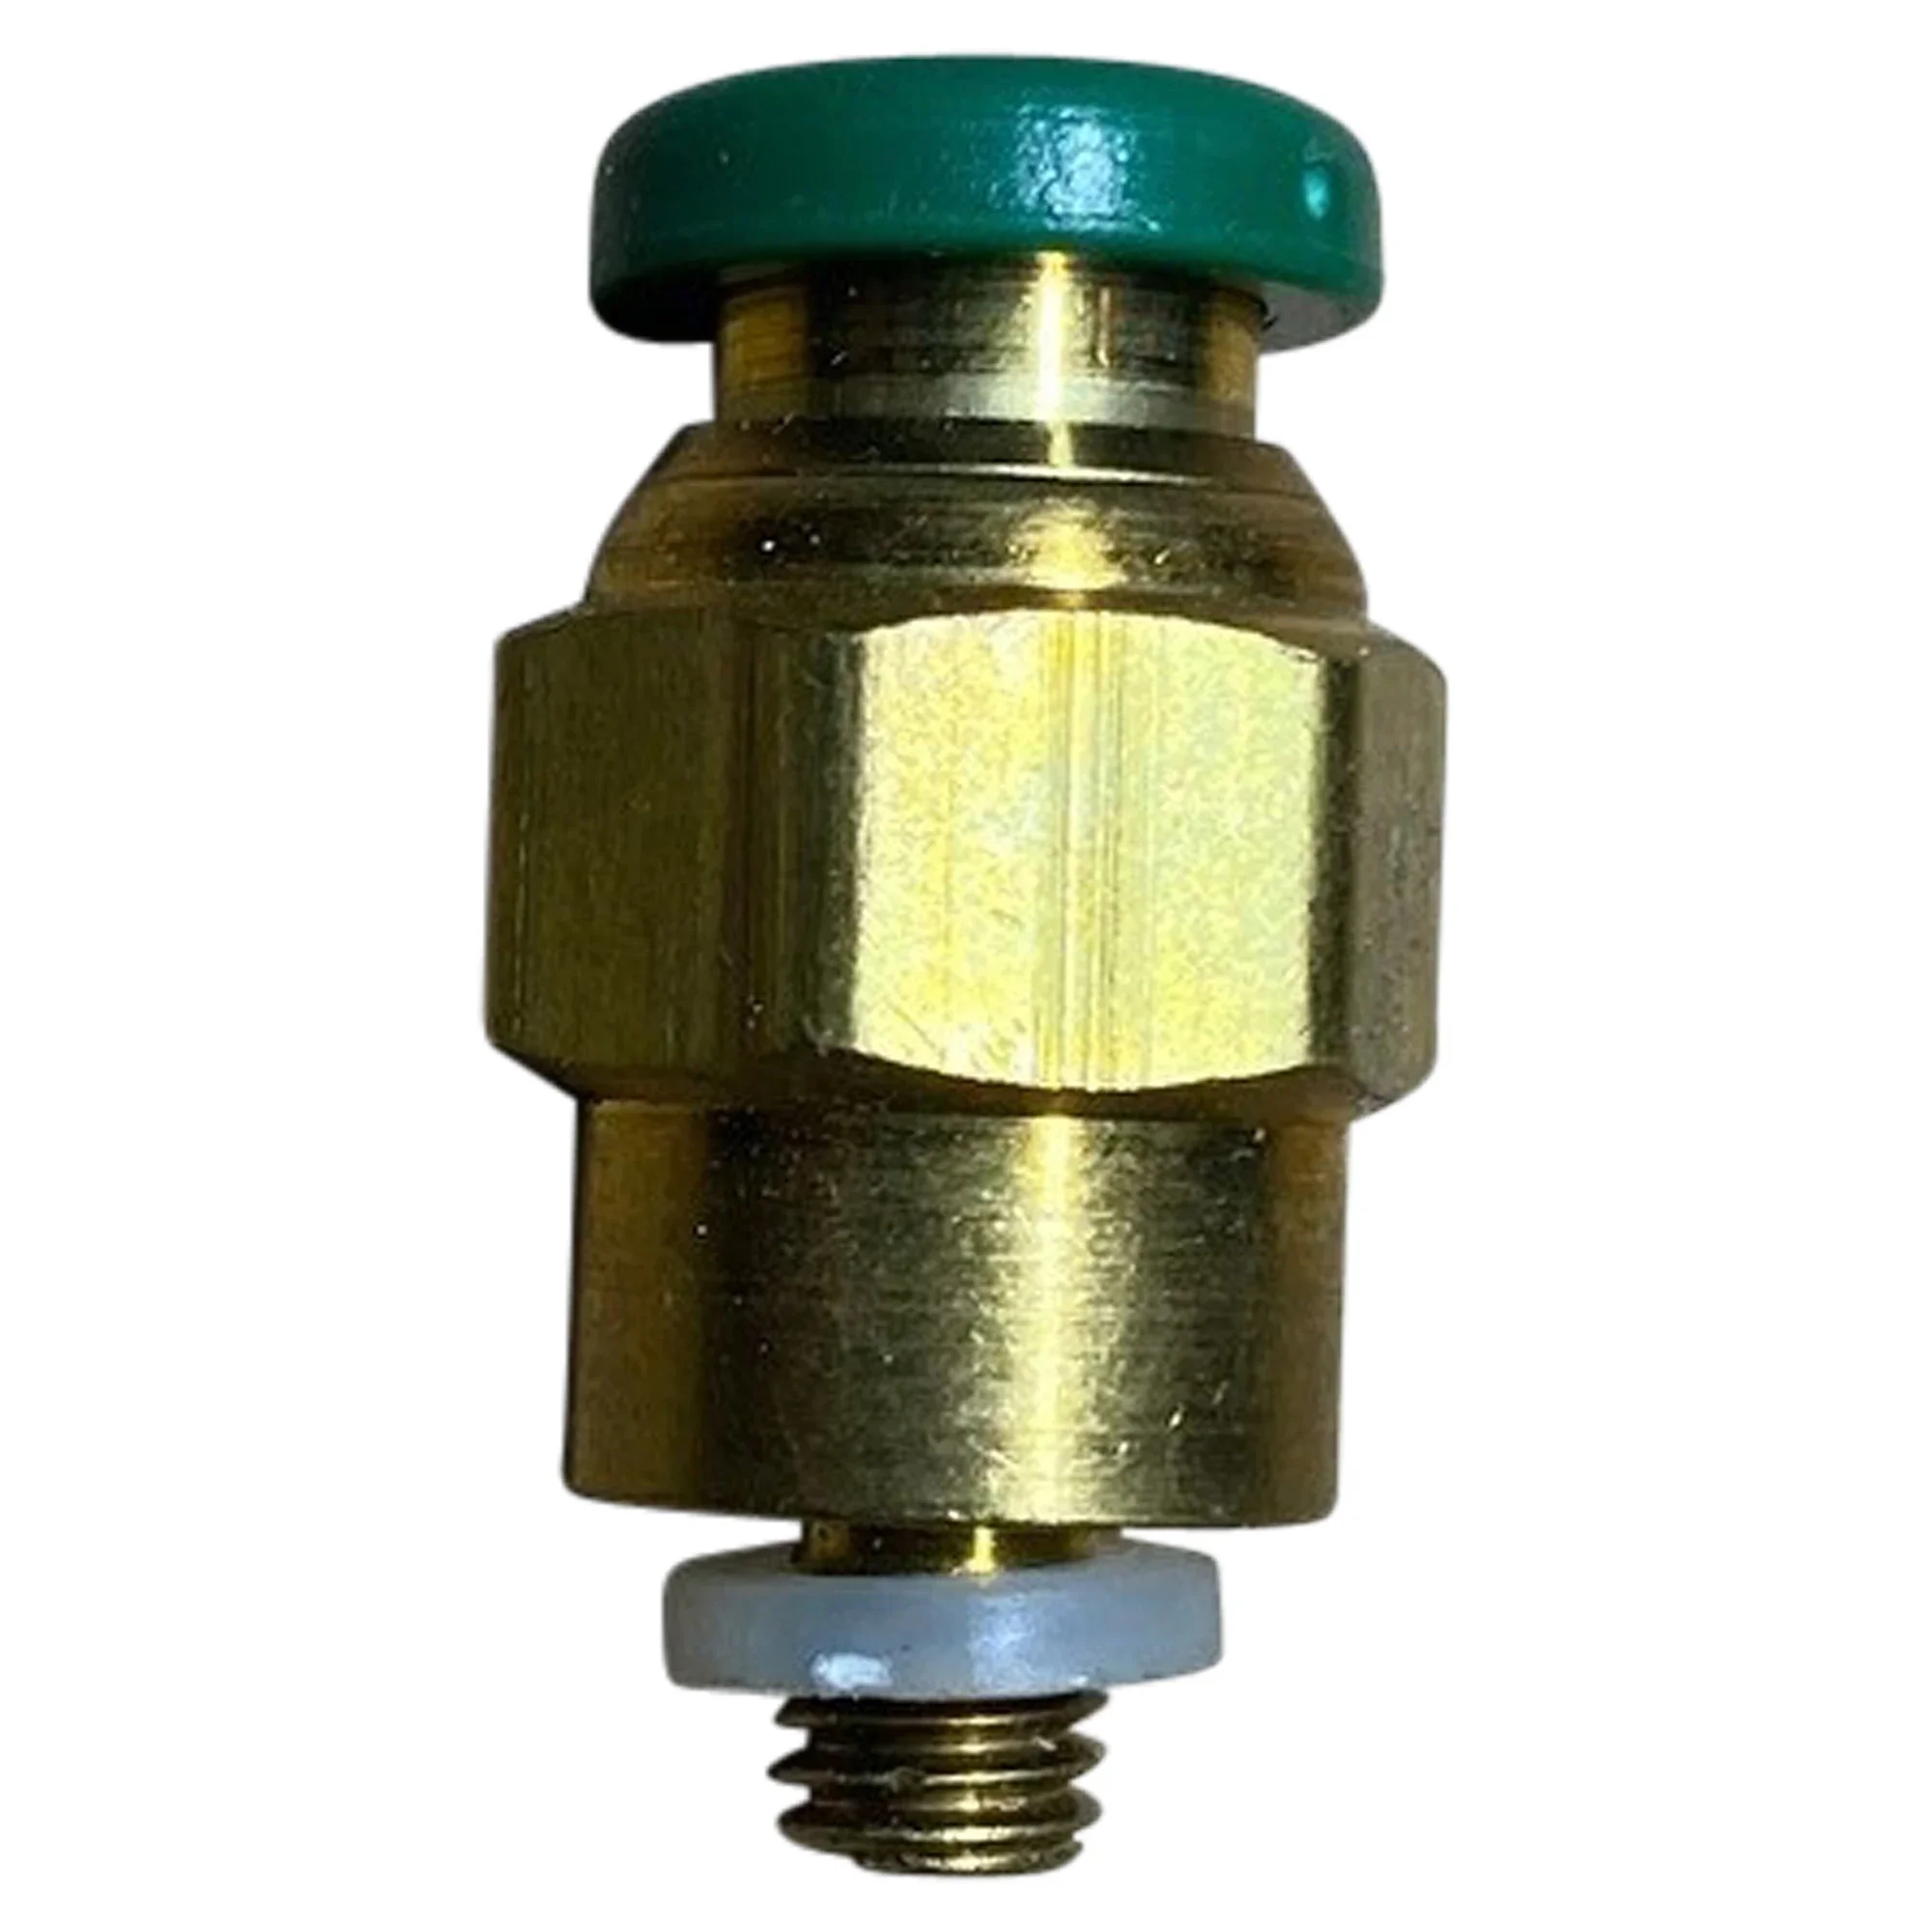 Wastebuilt® Replacement for Leach Connector Male